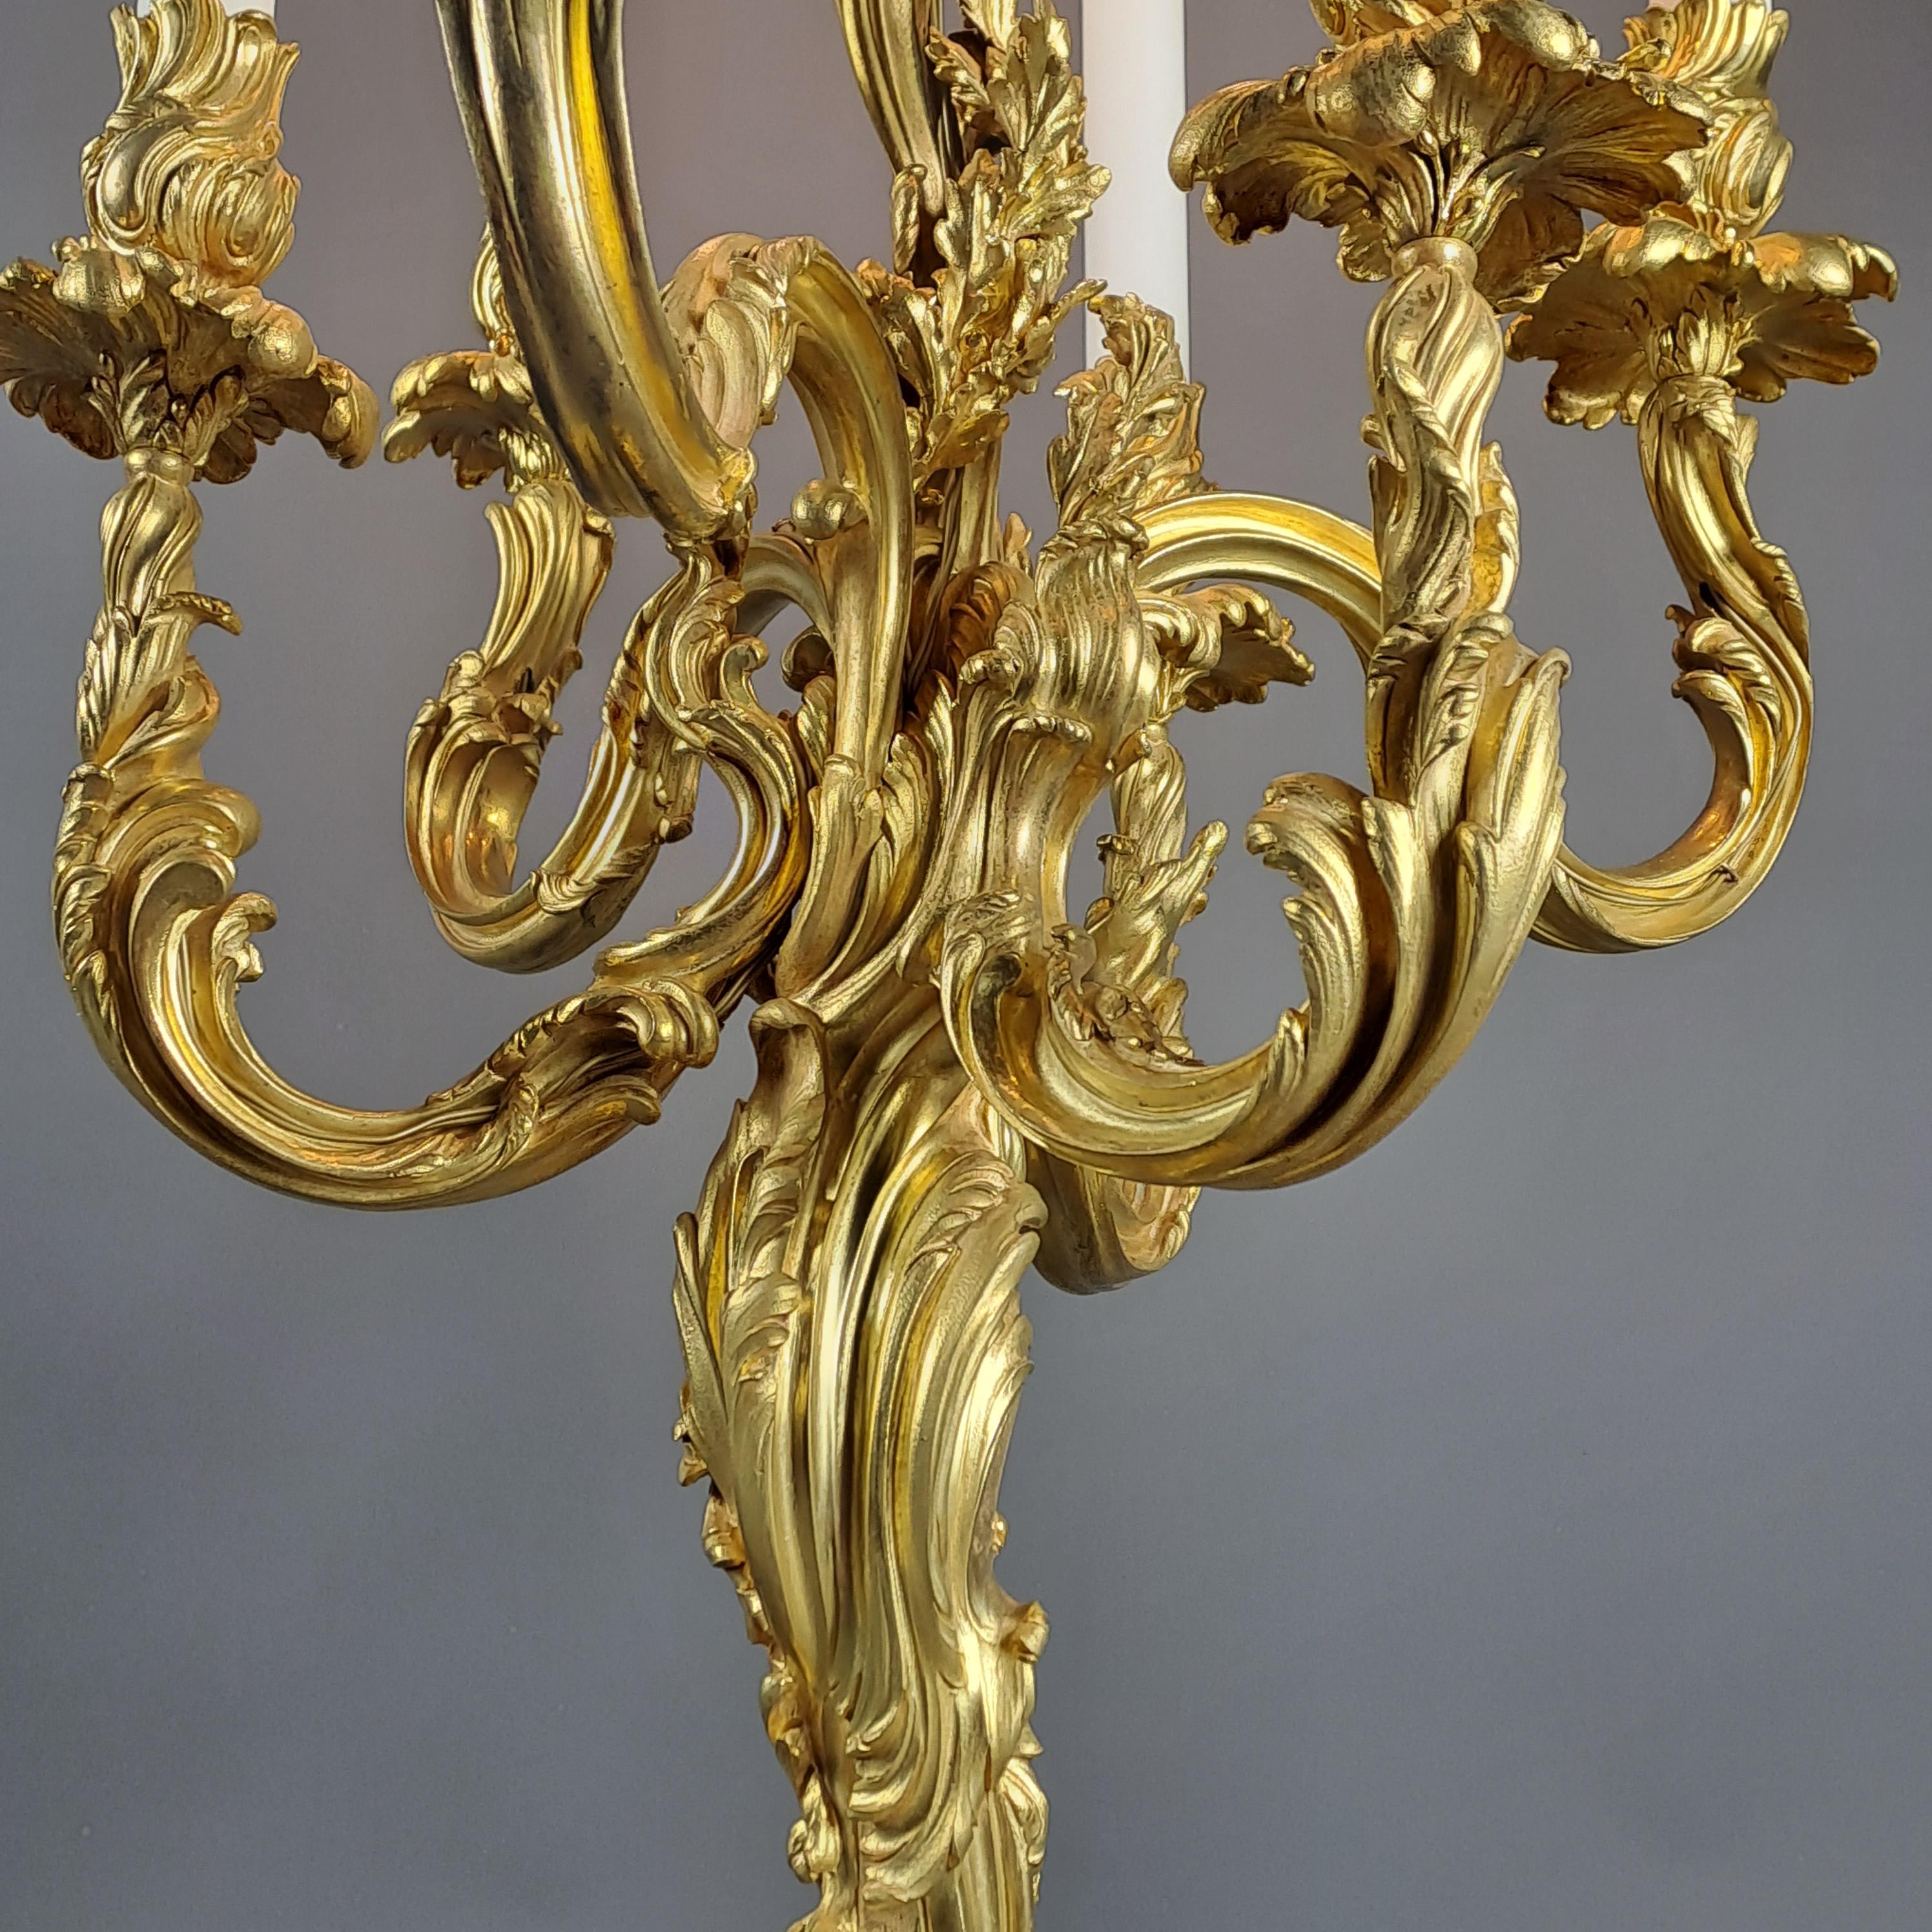 Bronze Important Rocaille Candelabra Mounted As A Lamp From Maison Millet In Paris